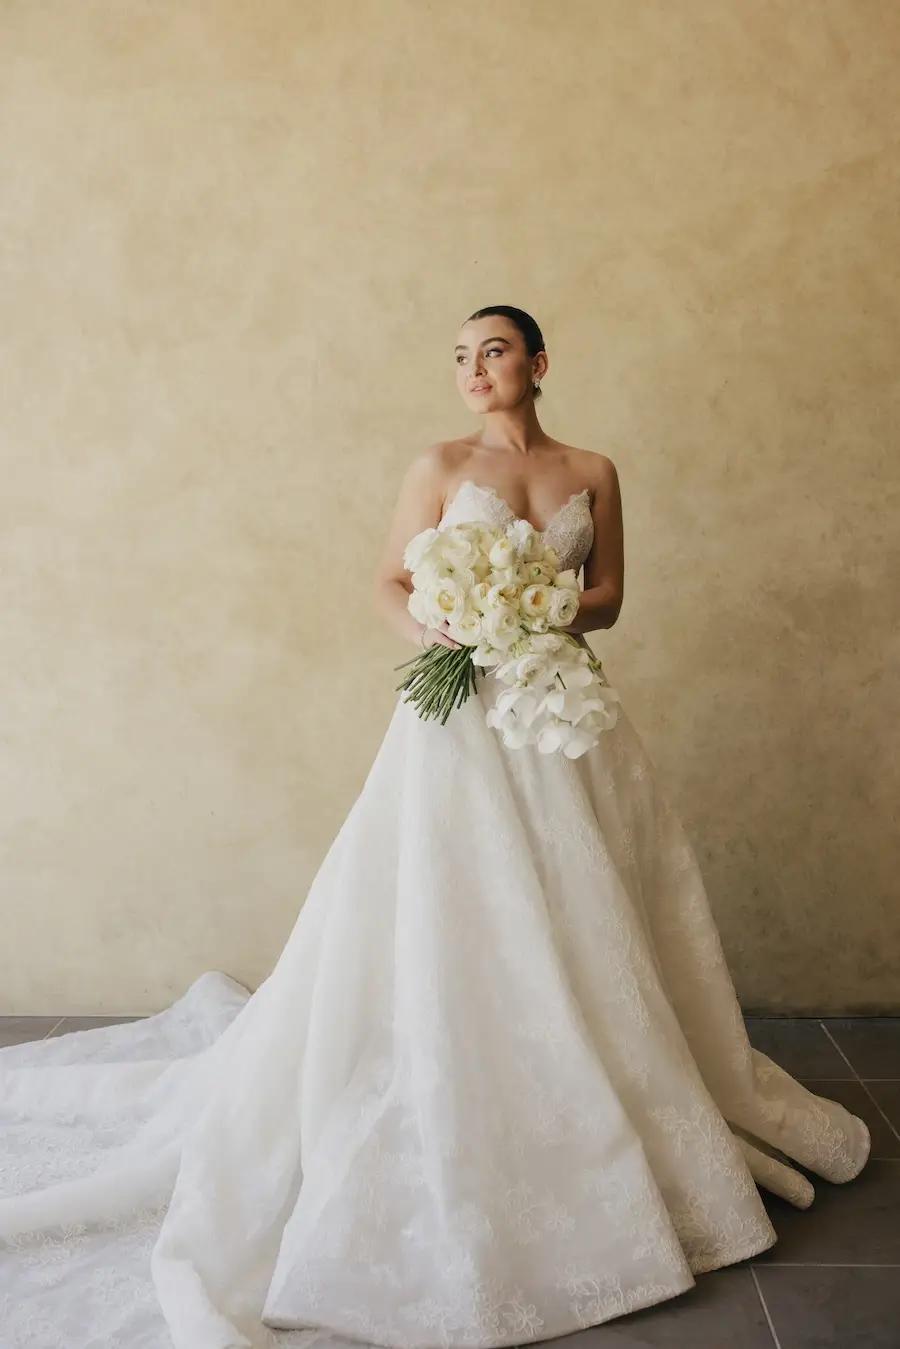 Georgette Wears Floral Lace Strapless Ball Gown Wedding Dress. Desktop Image